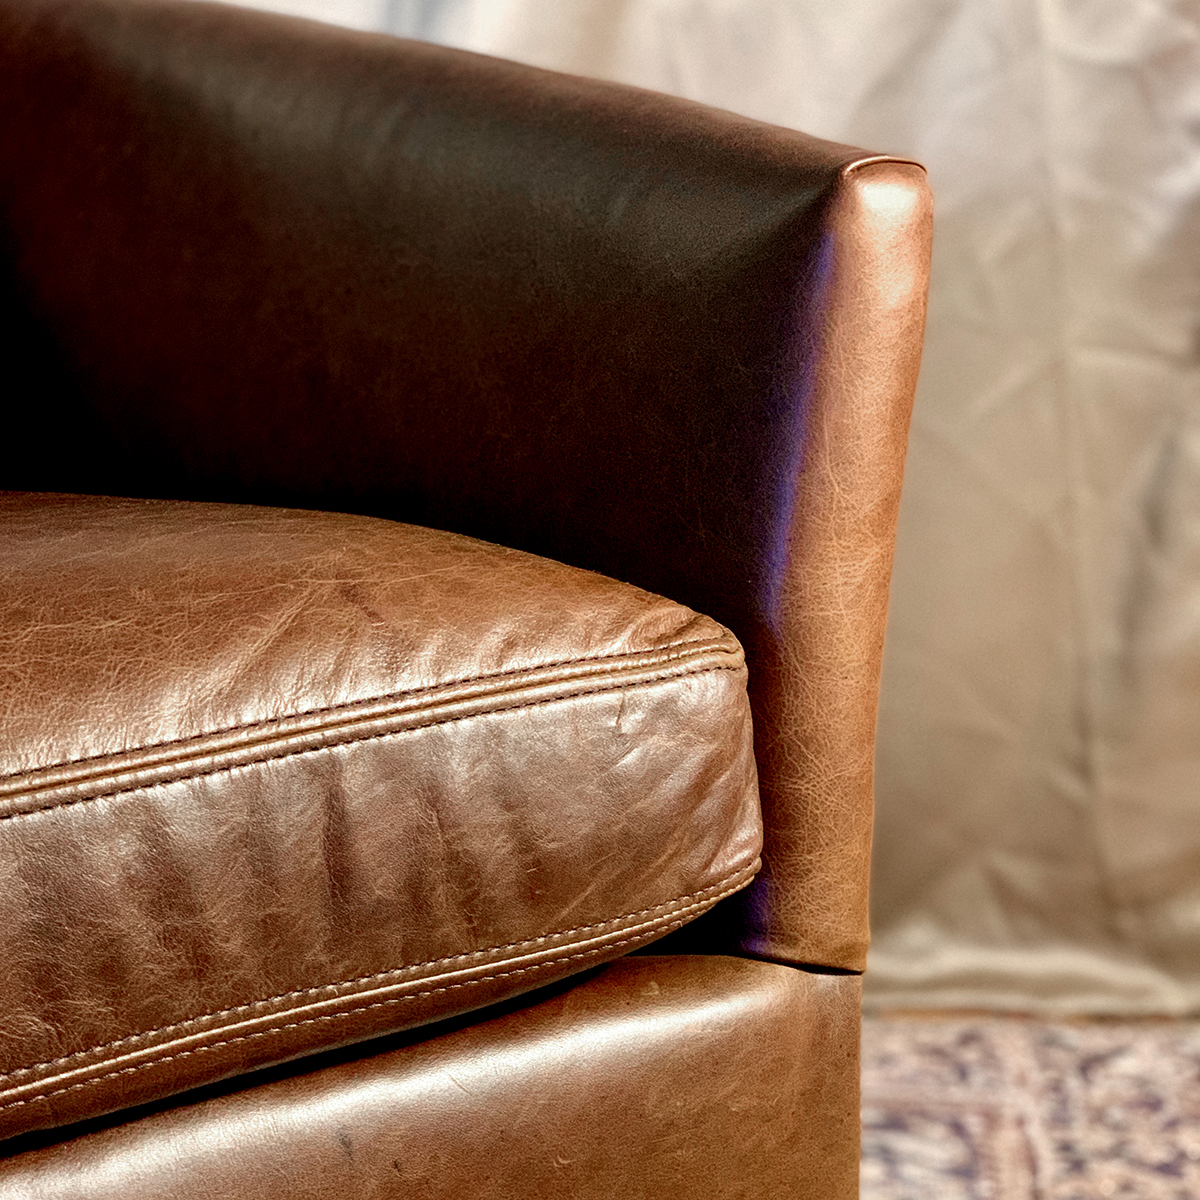 Dunmore Chair in Mad Dog Coffee Leather